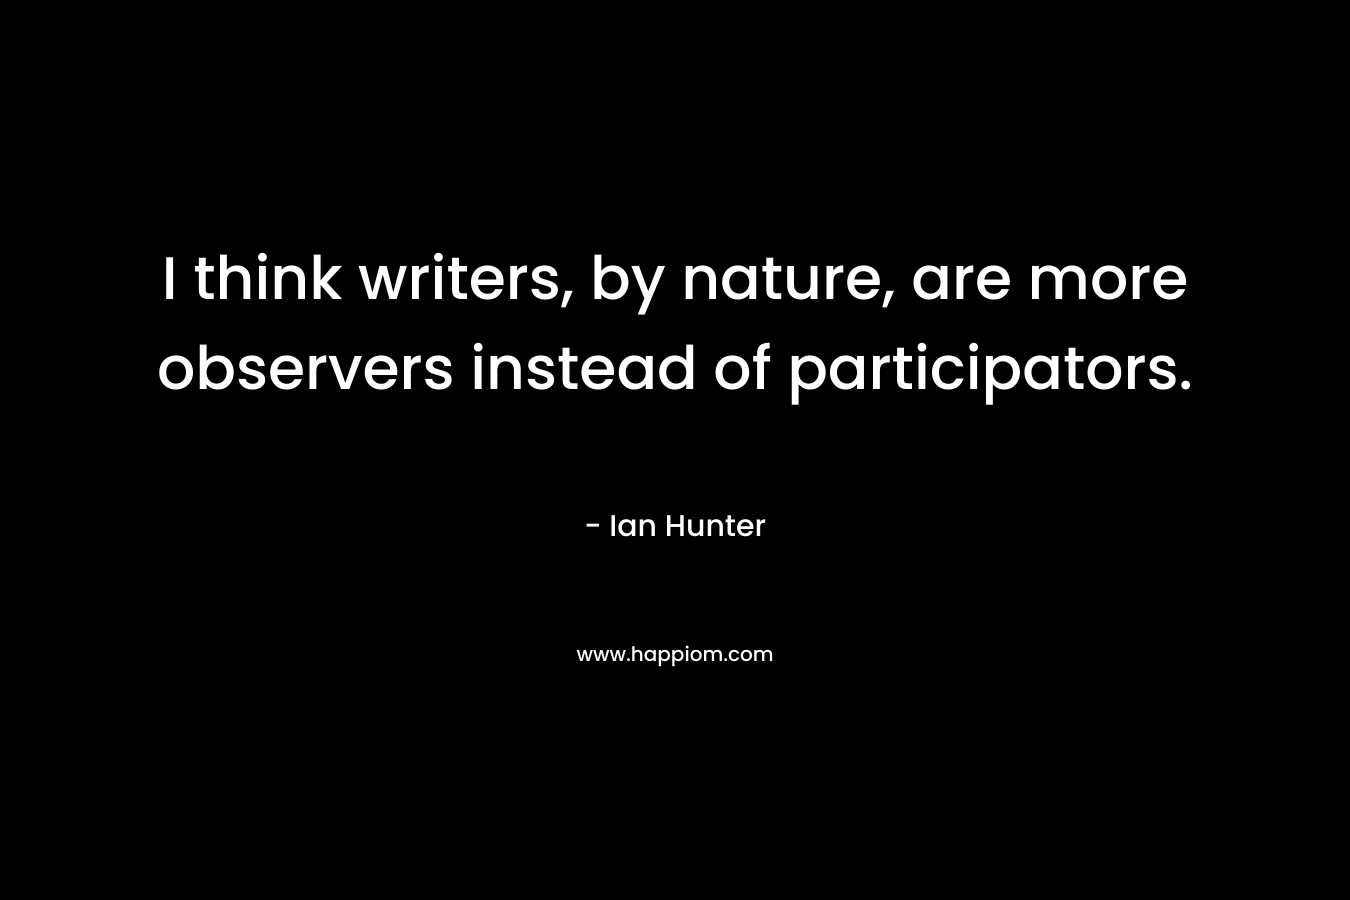 I think writers, by nature, are more observers instead of participators. – Ian Hunter